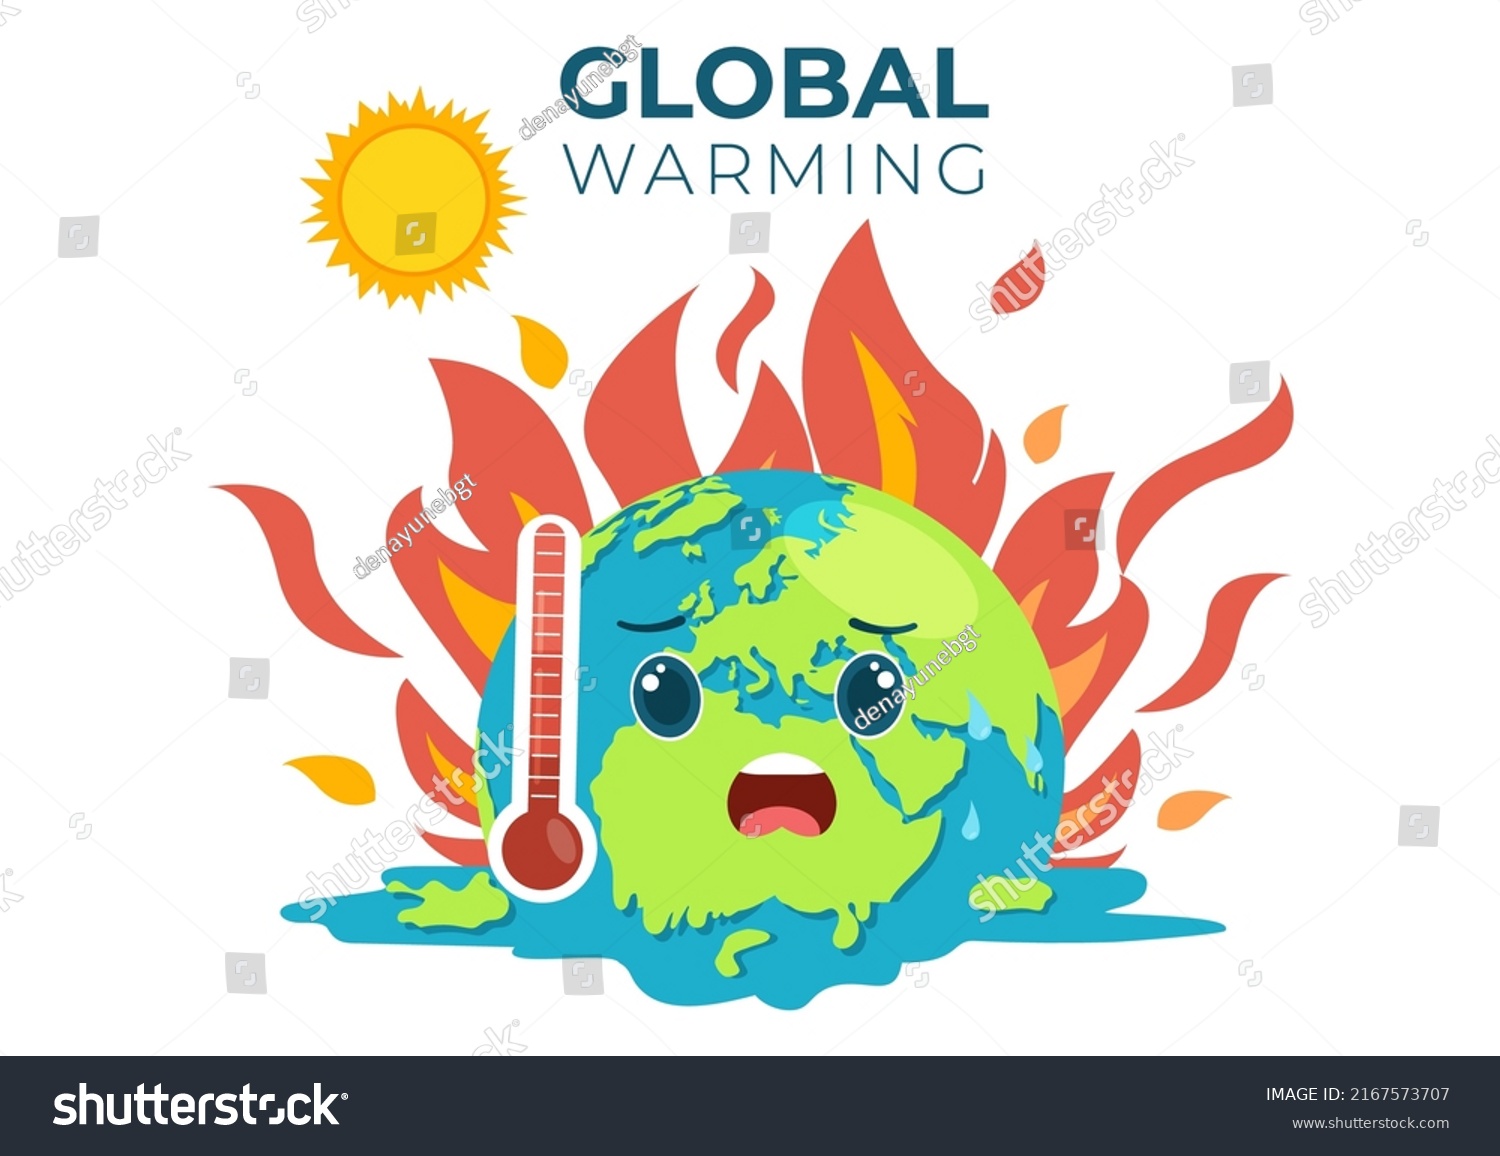 Global Warming Cartoon Style Illustration with Planet Earth in a Melting or Burning State and Image Sun to Prevent Damage to Nature and Climate Change #2167573707